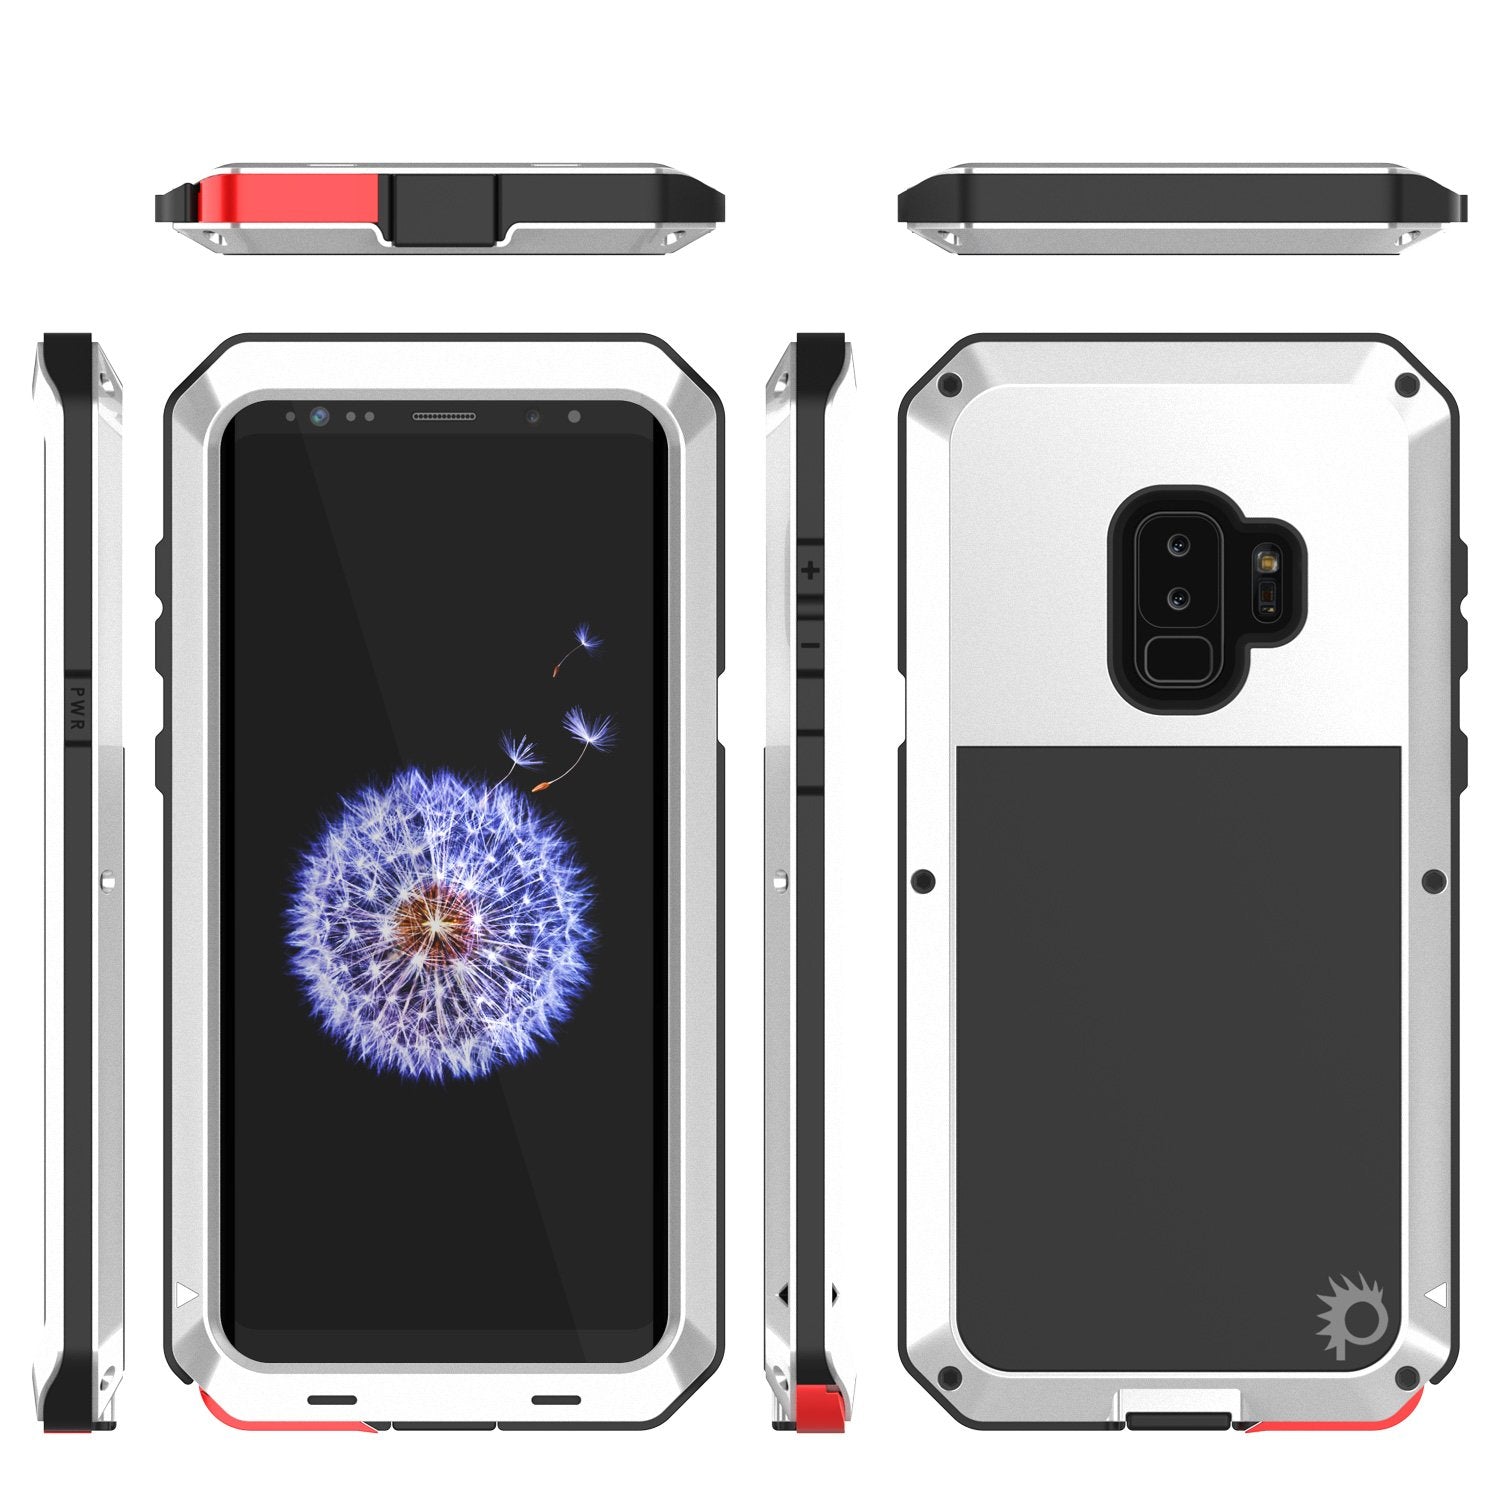 Galaxy S9 Plus Metal Case, Heavy Duty Military Grade Rugged Armor Cover [shock proof] Hybrid Full Body Hard Aluminum & TPU Design [non slip] W/ Prime Drop Protection for Samsung Galaxy S9 Plus [White] - PunkCase NZ